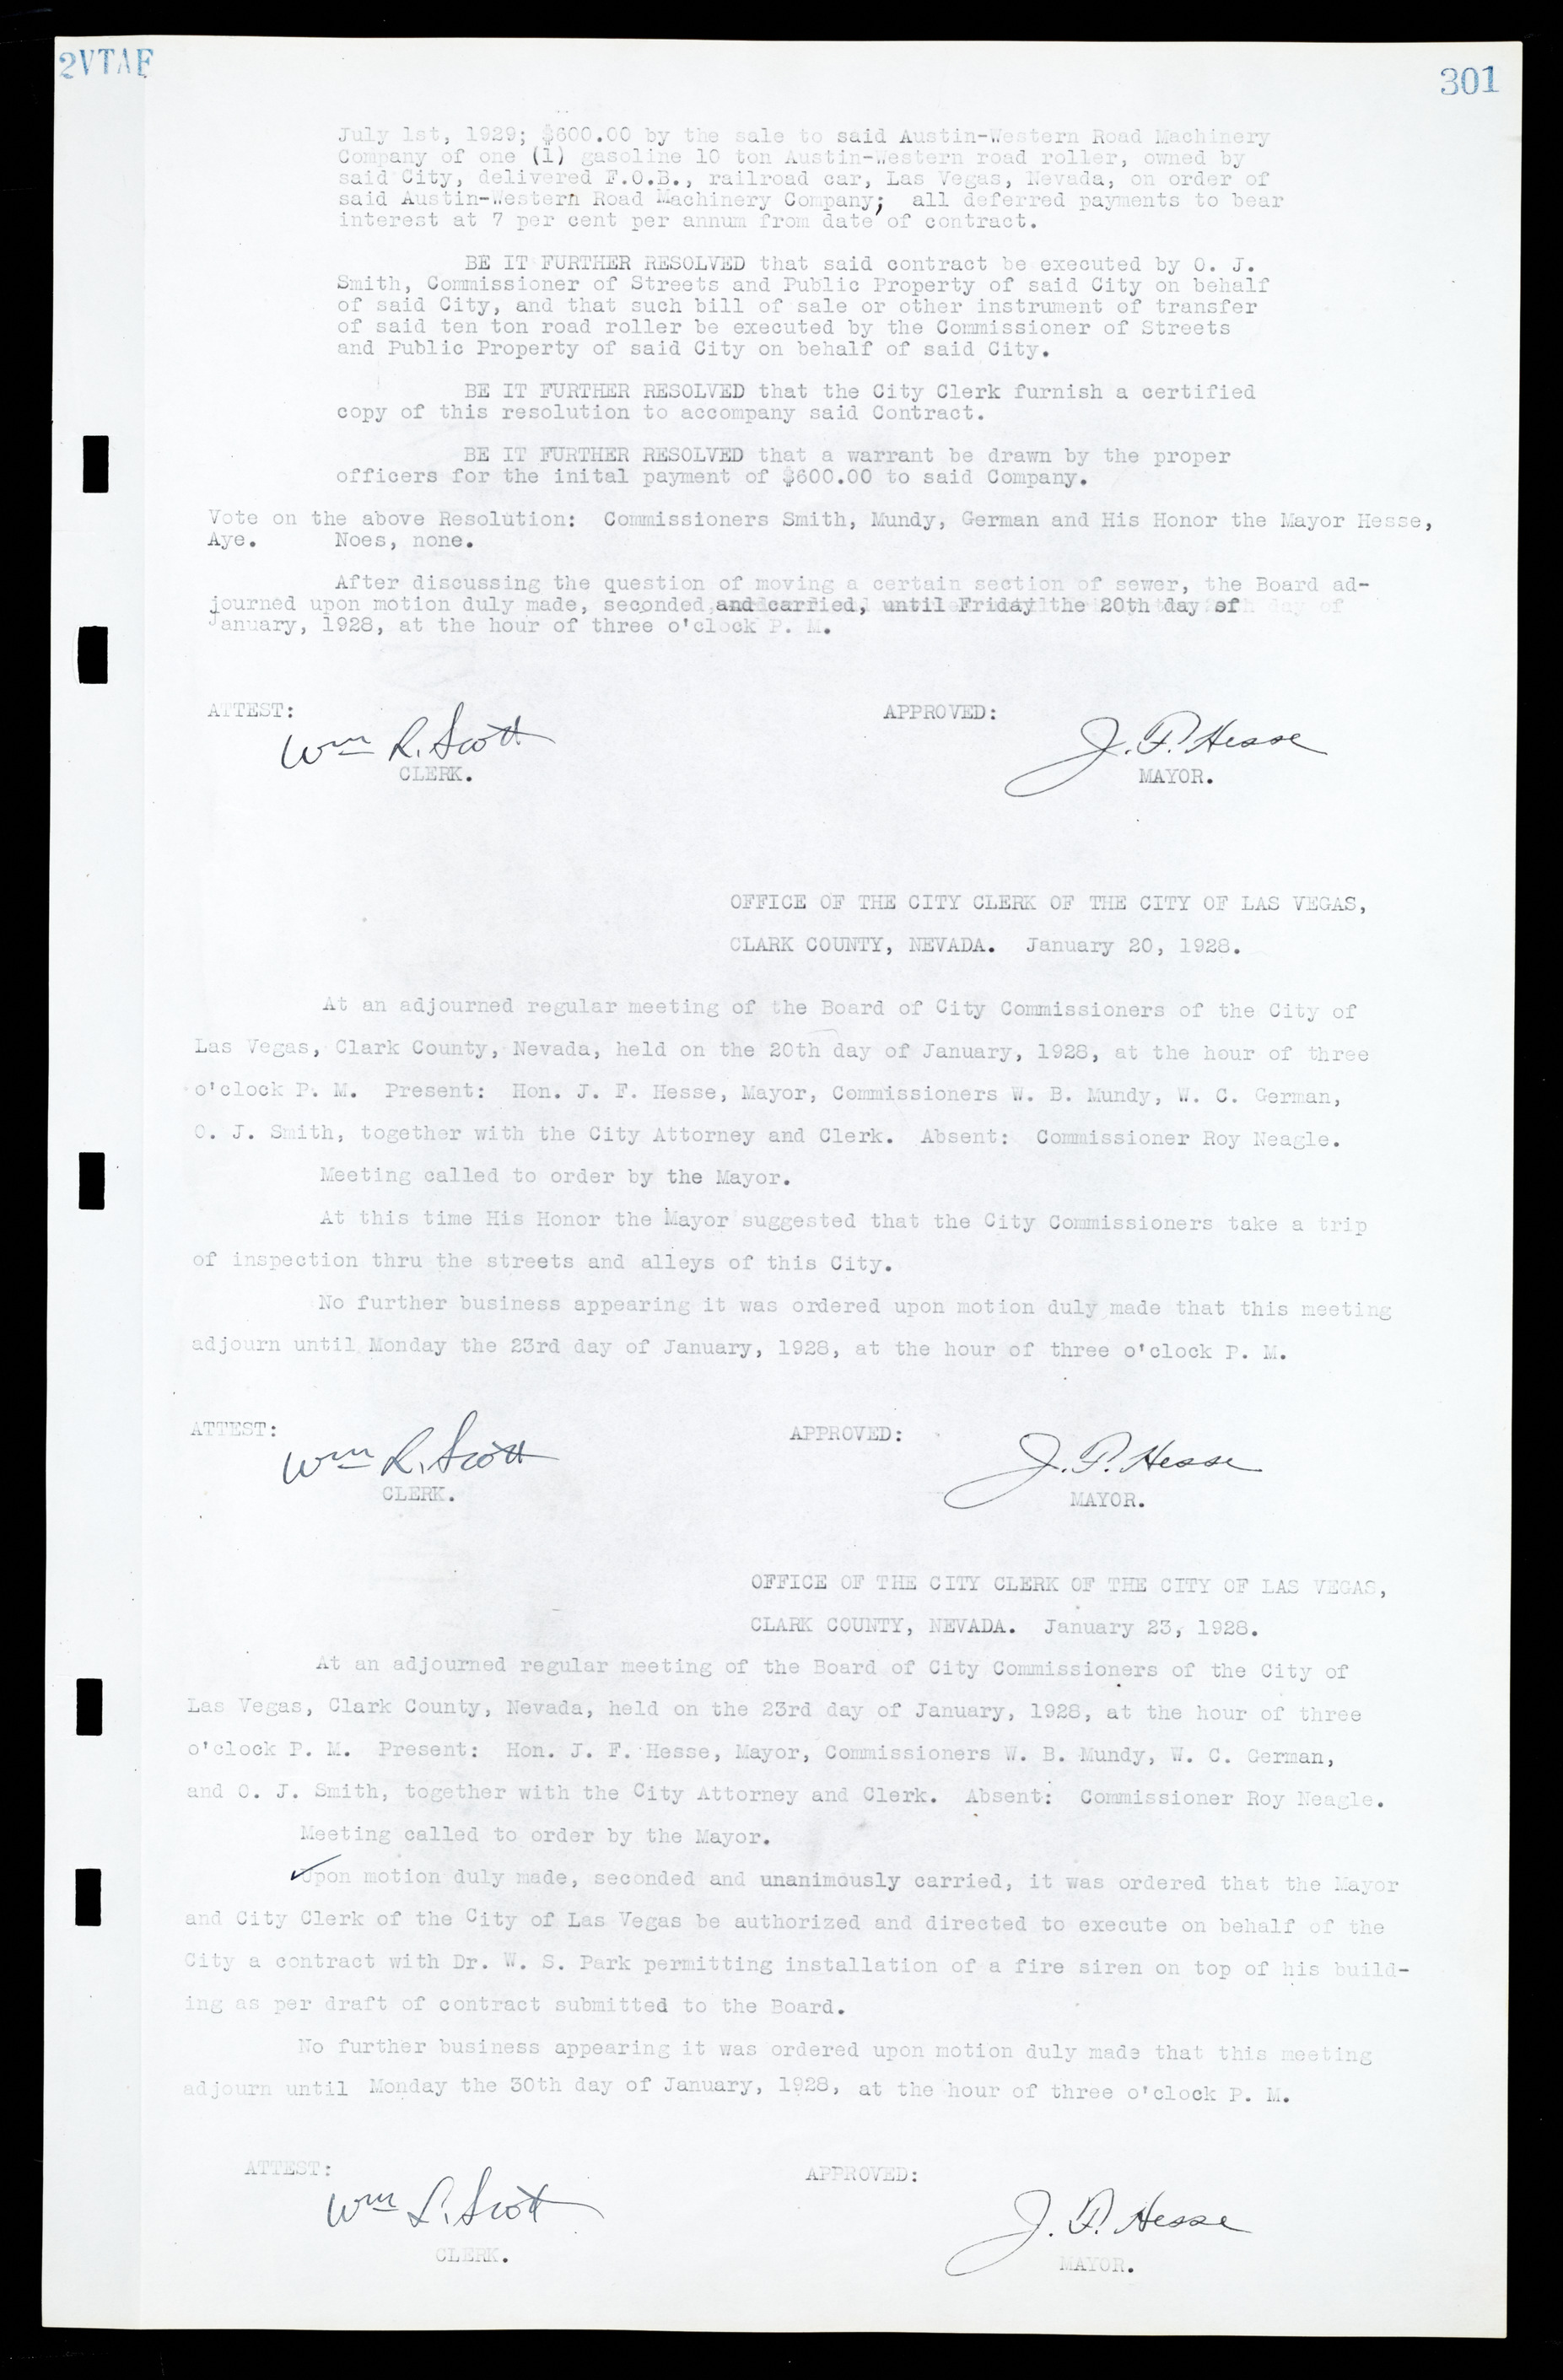 Las Vegas City Commission Minutes, March 1, 1922 to May 10, 1929, lvc000002-310